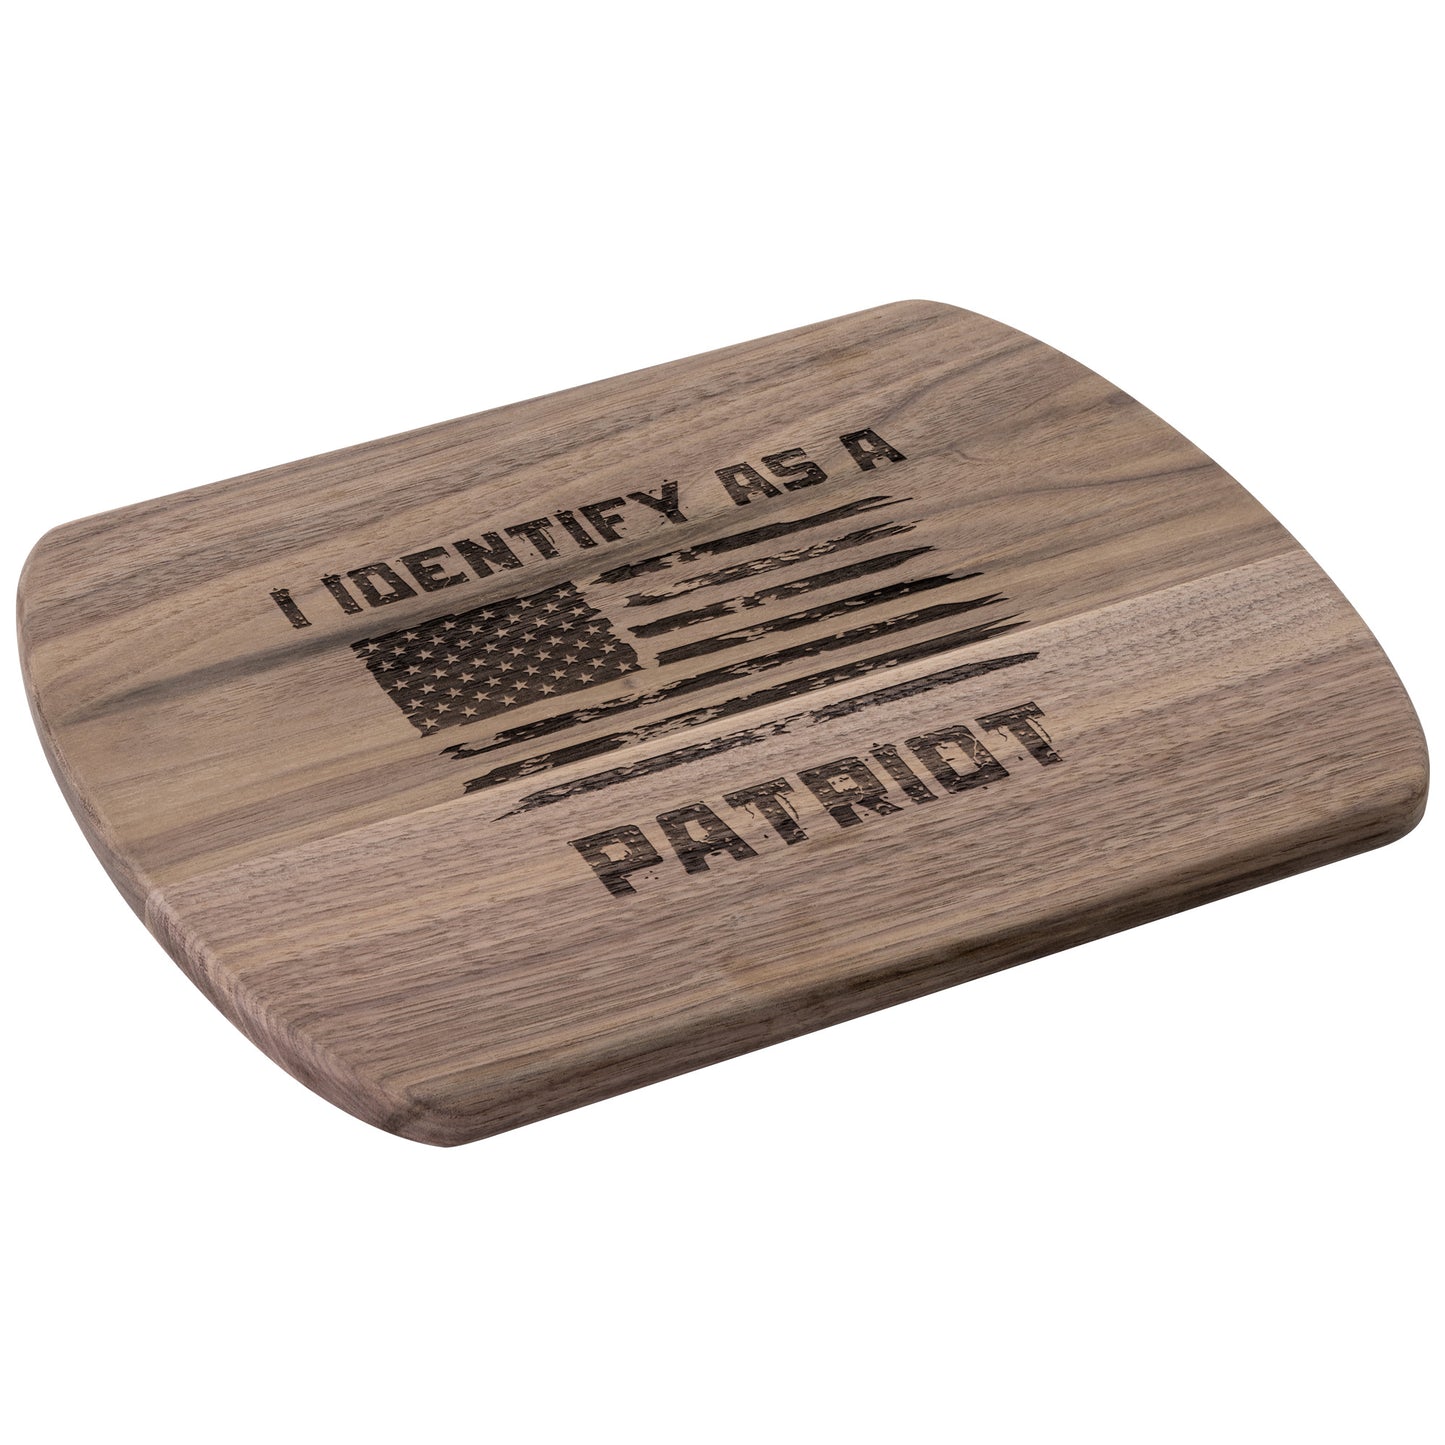 "I Identify As A Patriot" Hardwood Cutting Board - Weave Got Gifts - Unique Gifts You Won’t Find Anywhere Else!